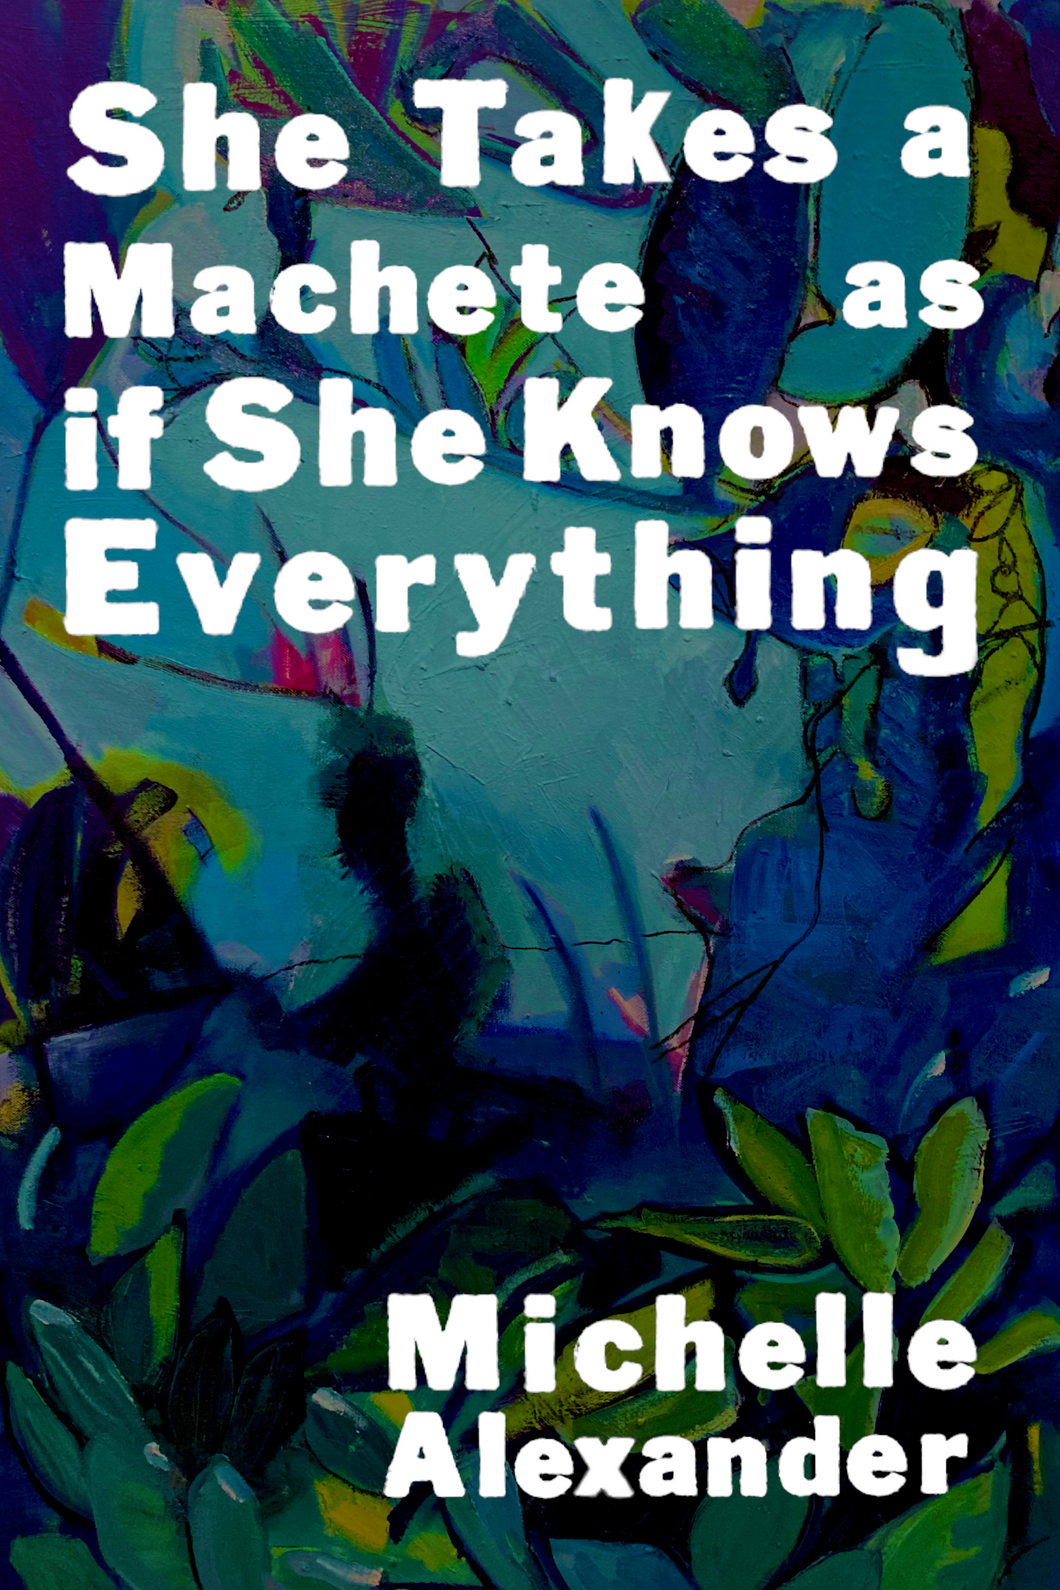 She Takes a Machete as if She Knows Everything, by Michelle Alexander-Print Books-Bottlecap Press